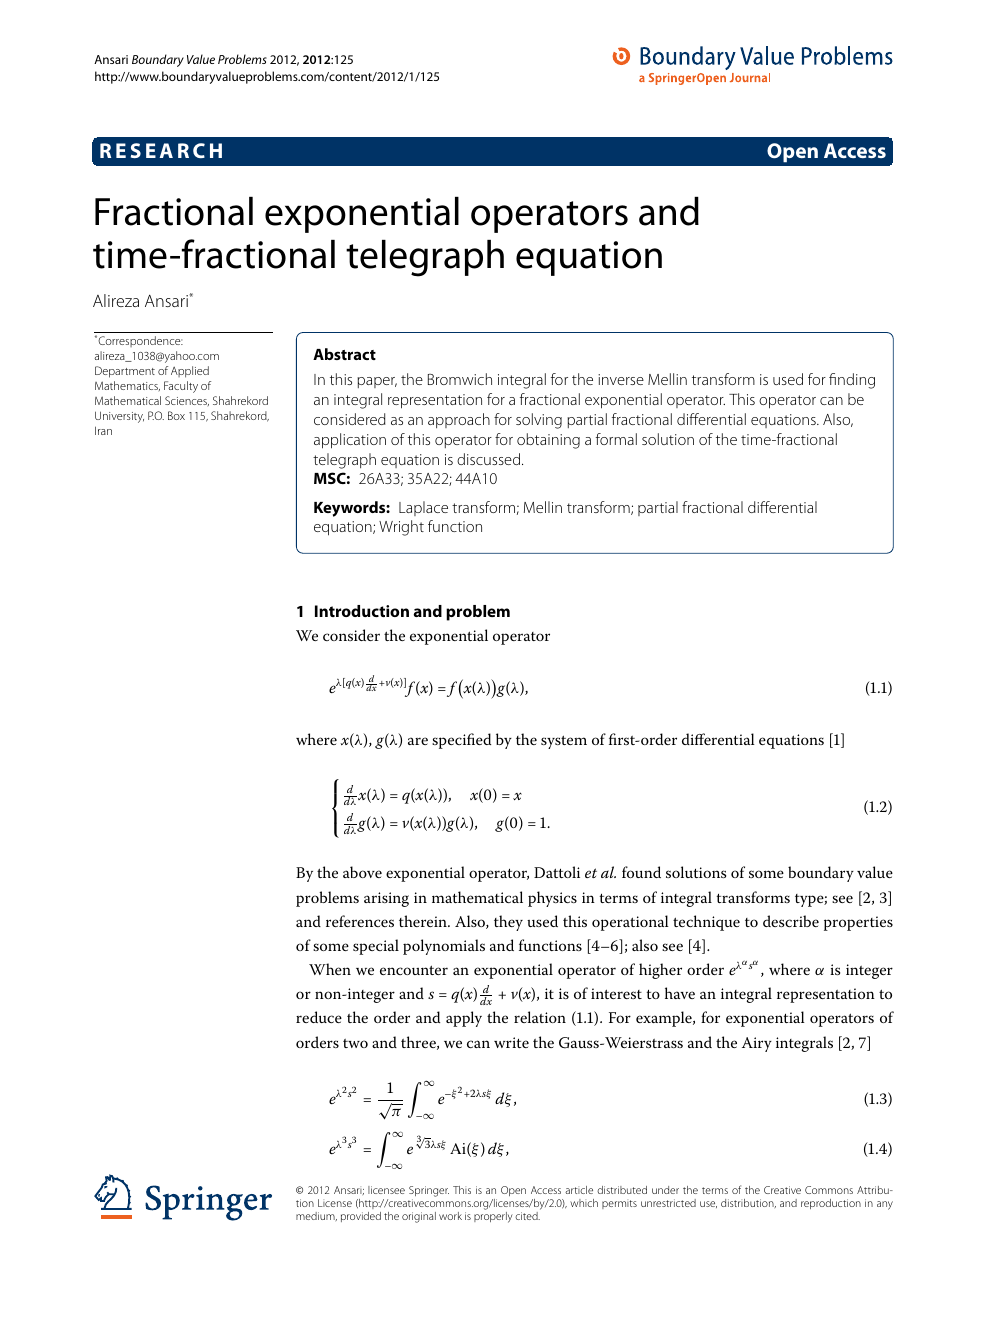 Fractional Exponential Operators And Time Fractional Telegraph Equation Topic Of Research Paper In Mathematics Download Scholarly Article Pdf And Read For Free On Cyberleninka Open Science Hub